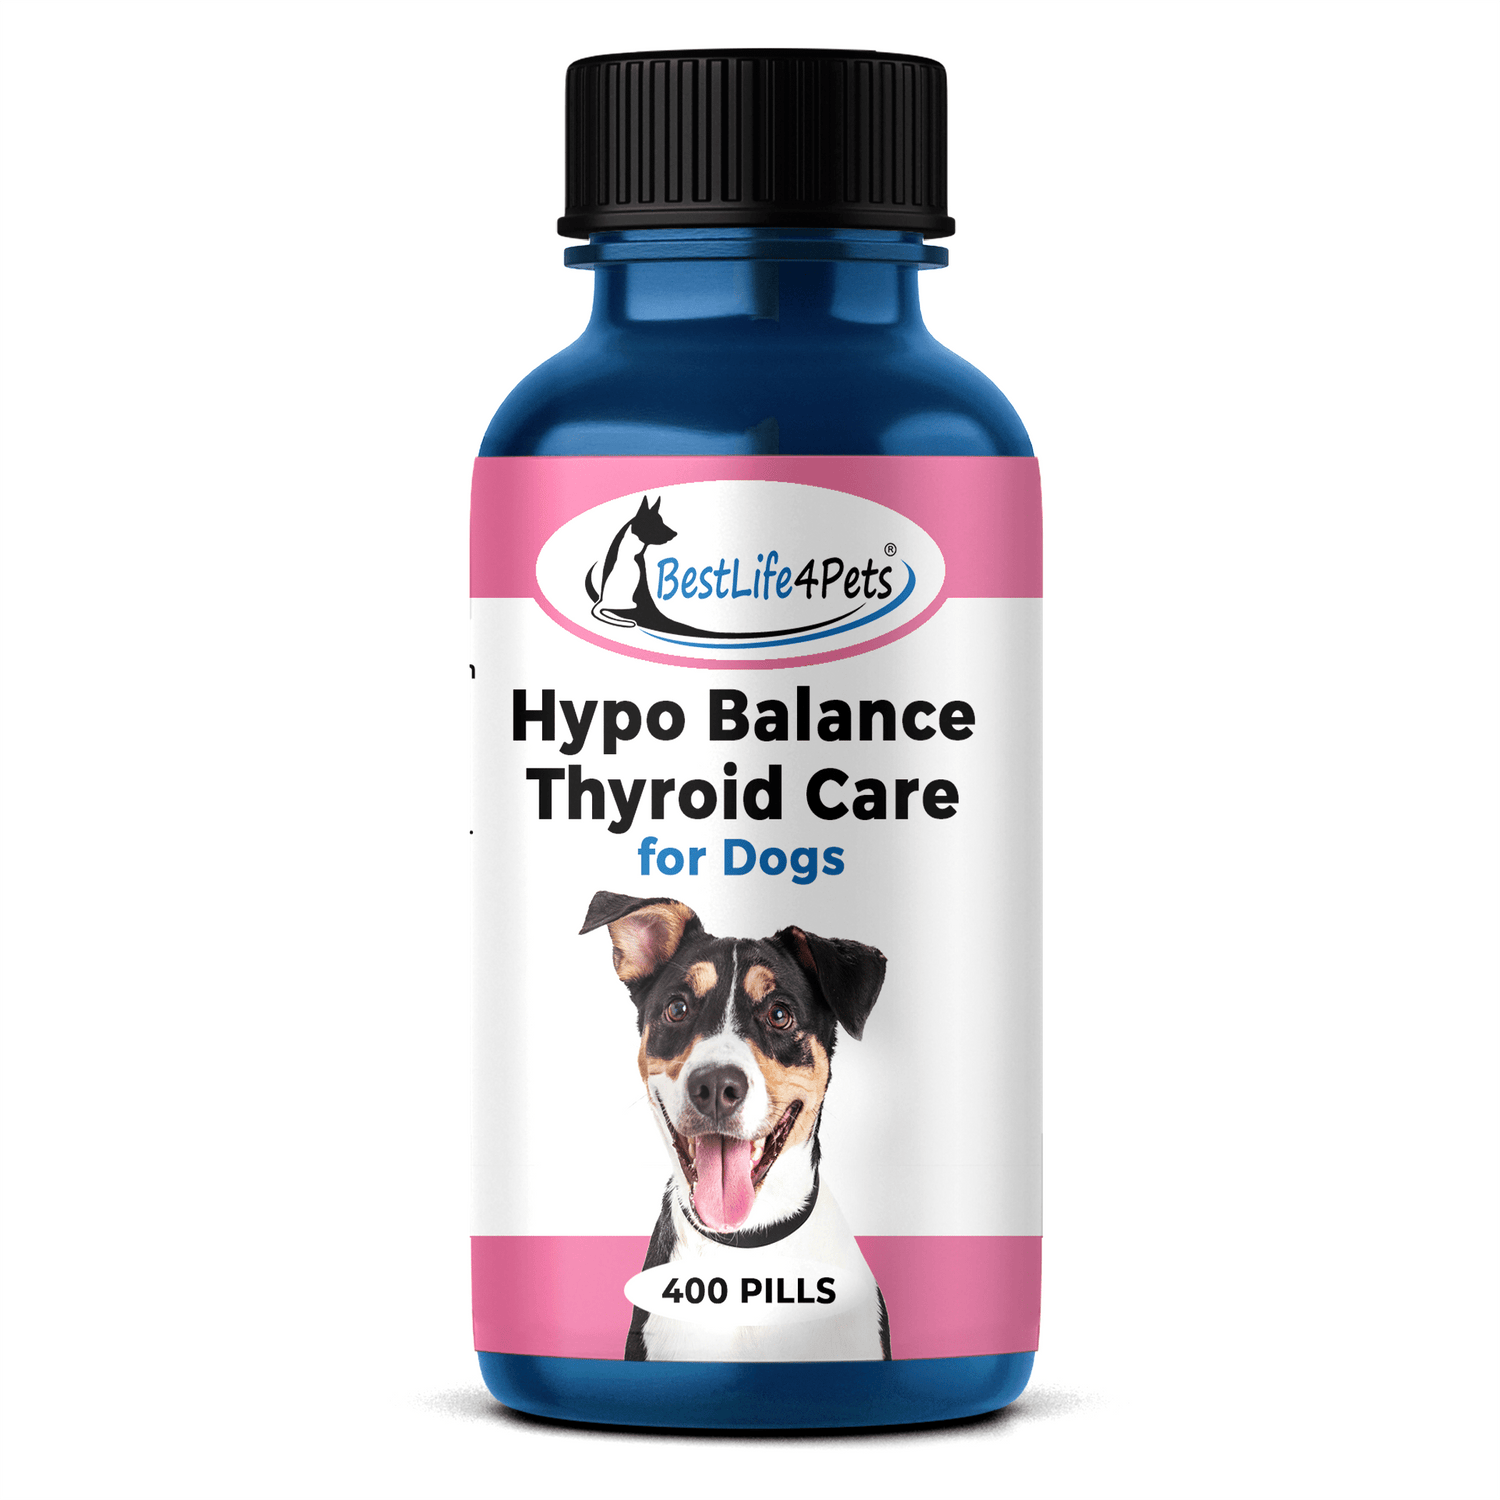 Natural Thyroid Support for Dogs - Promotes Thyroid Balance for Hypothyroidism & Goiters BestLife4Pets 